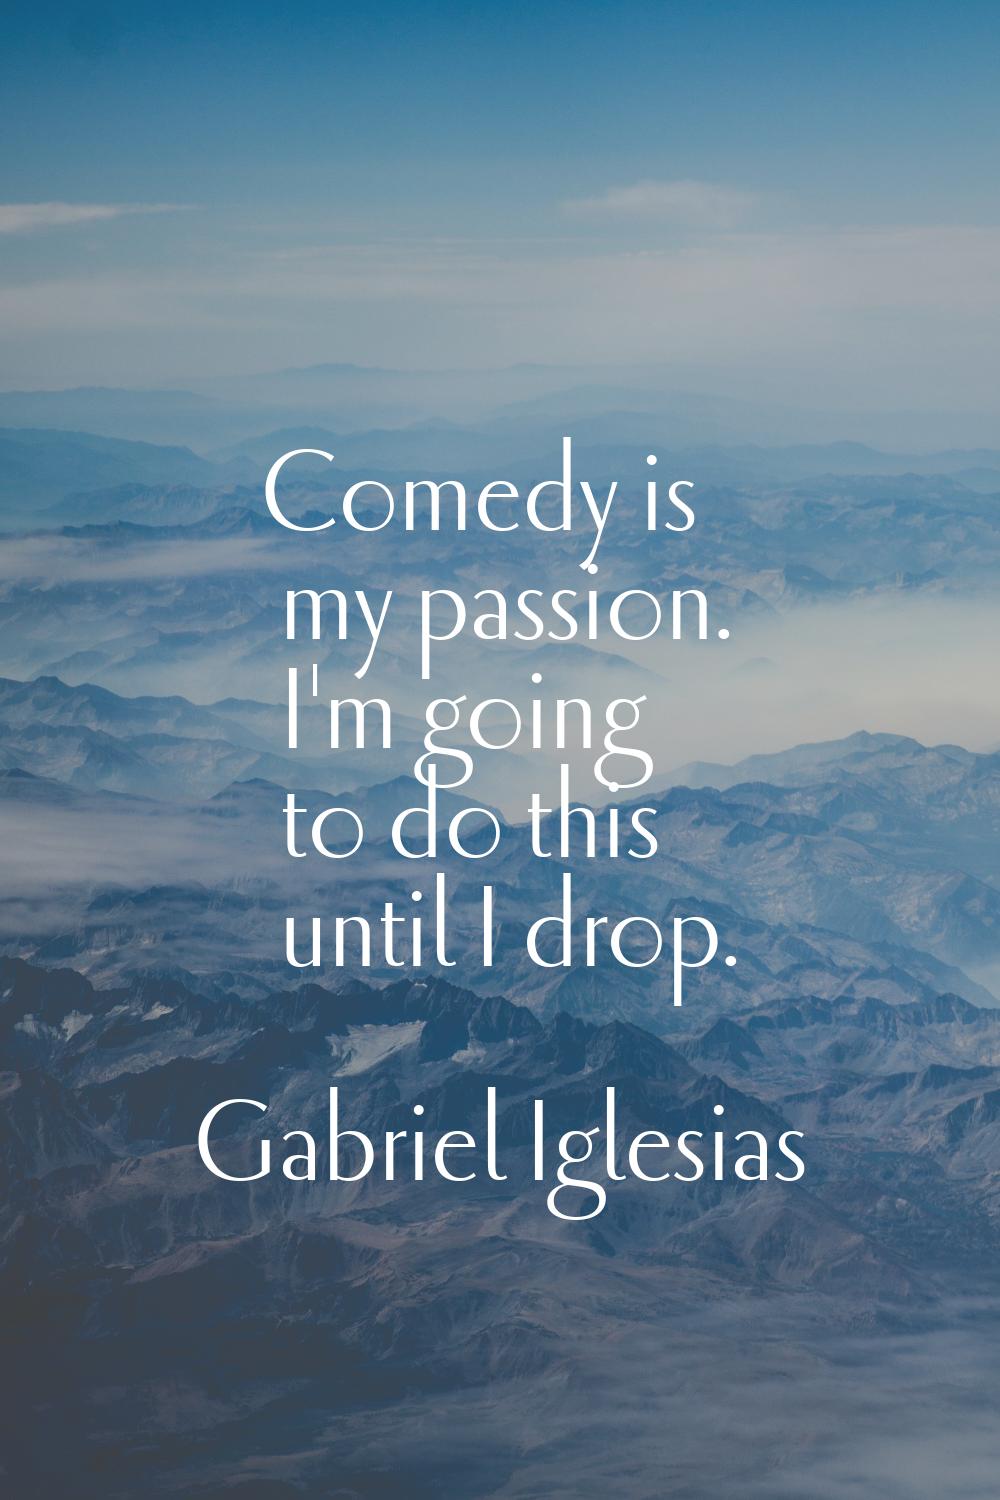 Comedy is my passion. I'm going to do this until I drop.